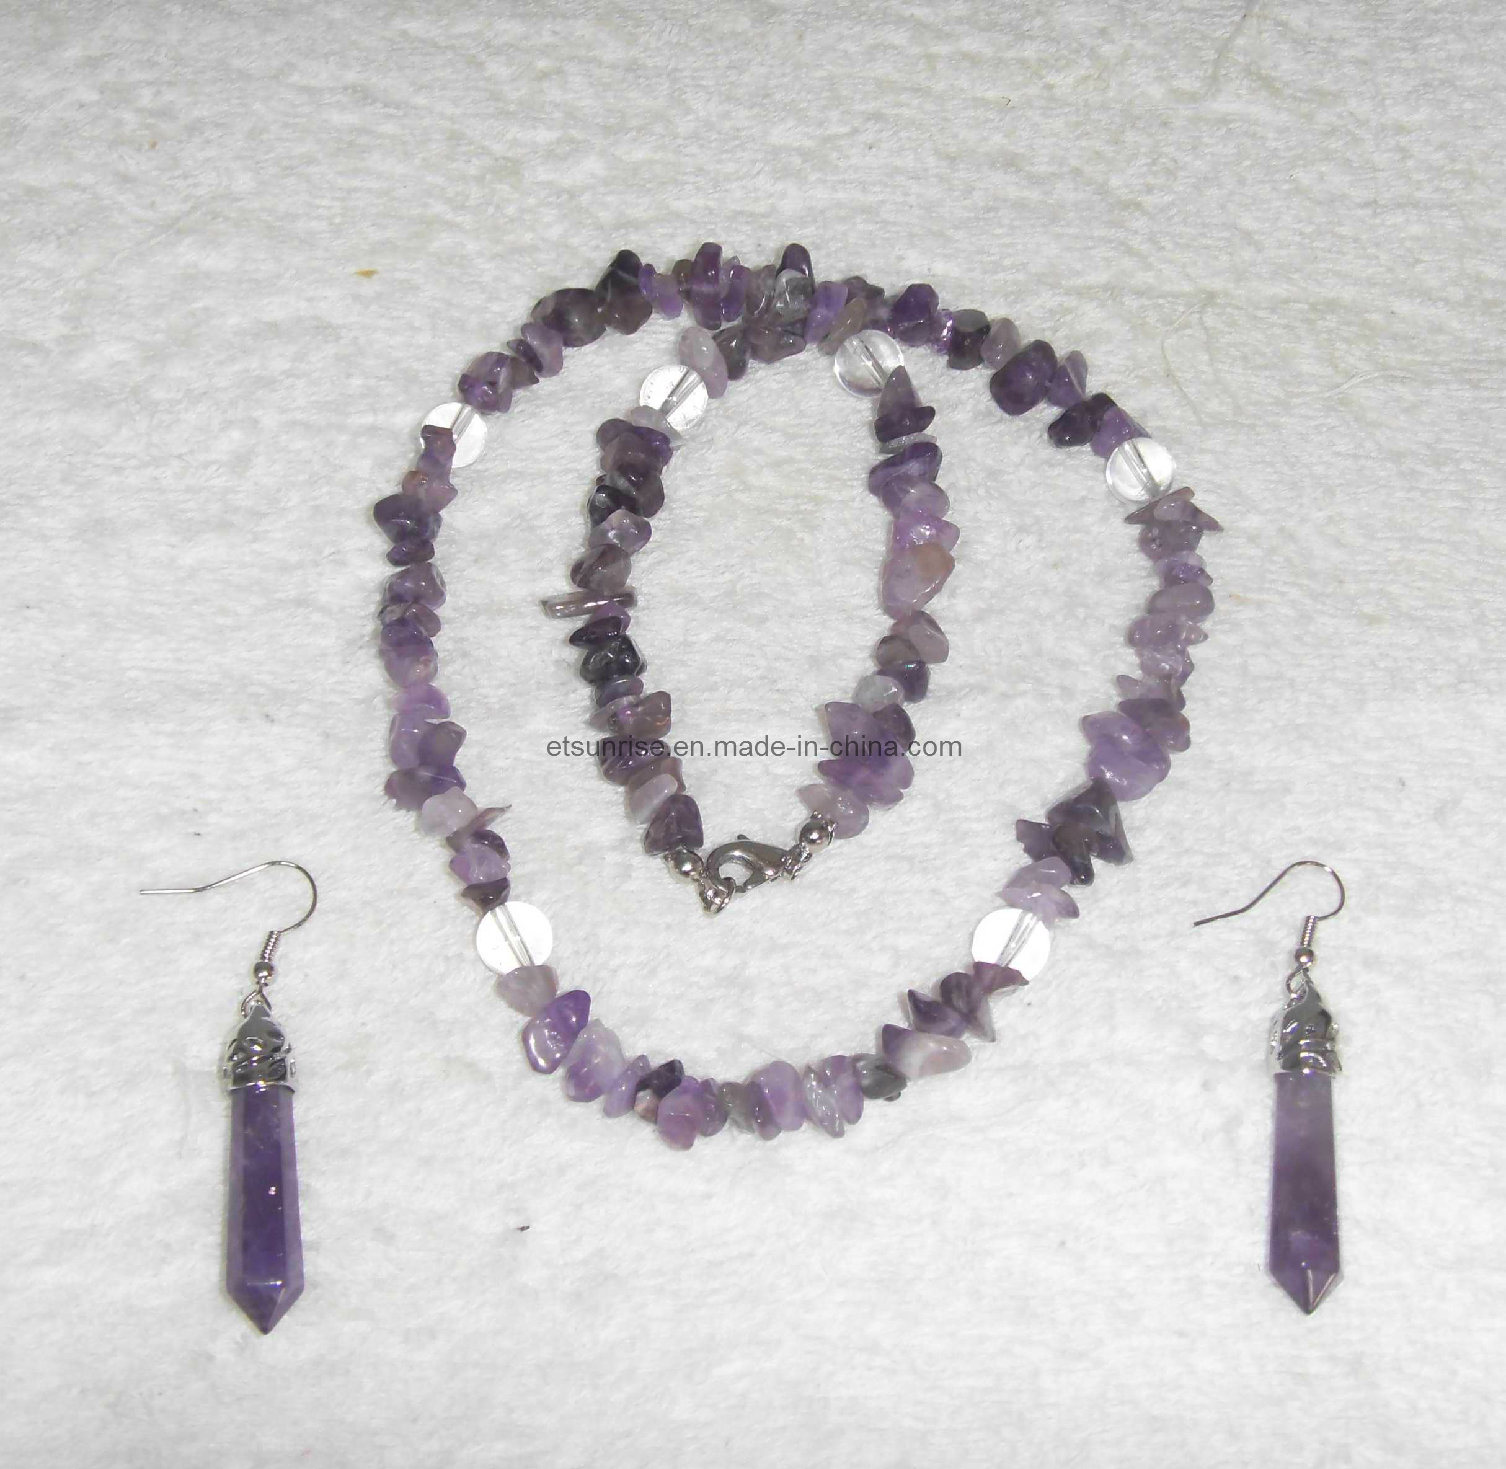 Semi Precious Stone Natural Crystal Amethyst Charming Necklace Jewelry Sets